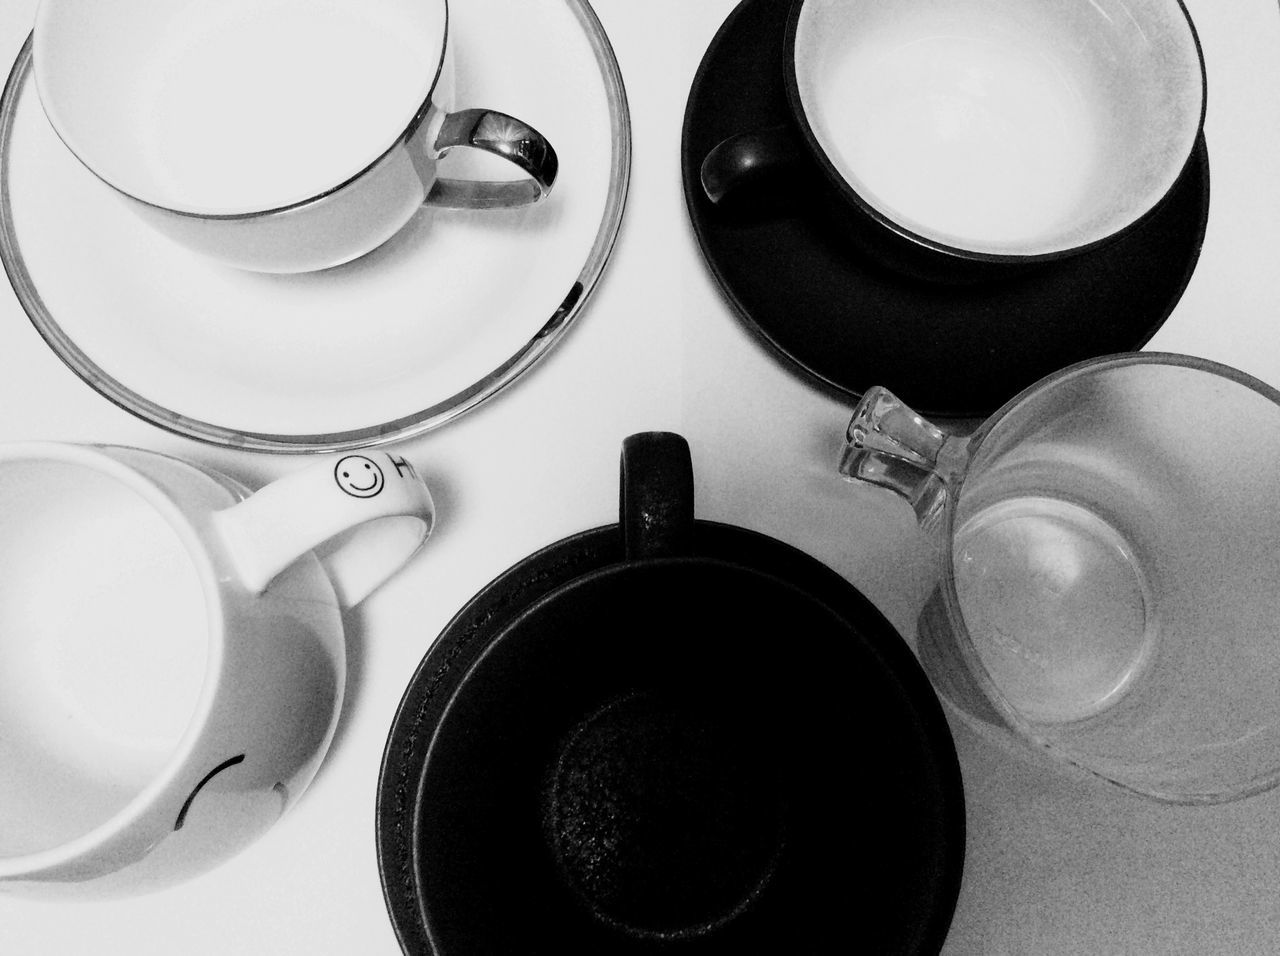 indoors, still life, table, high angle view, coffee cup, white color, plate, close-up, cup, no people, spoon, drink, directly above, saucer, food and drink, fork, empty, kitchen utensil, technology, large group of objects